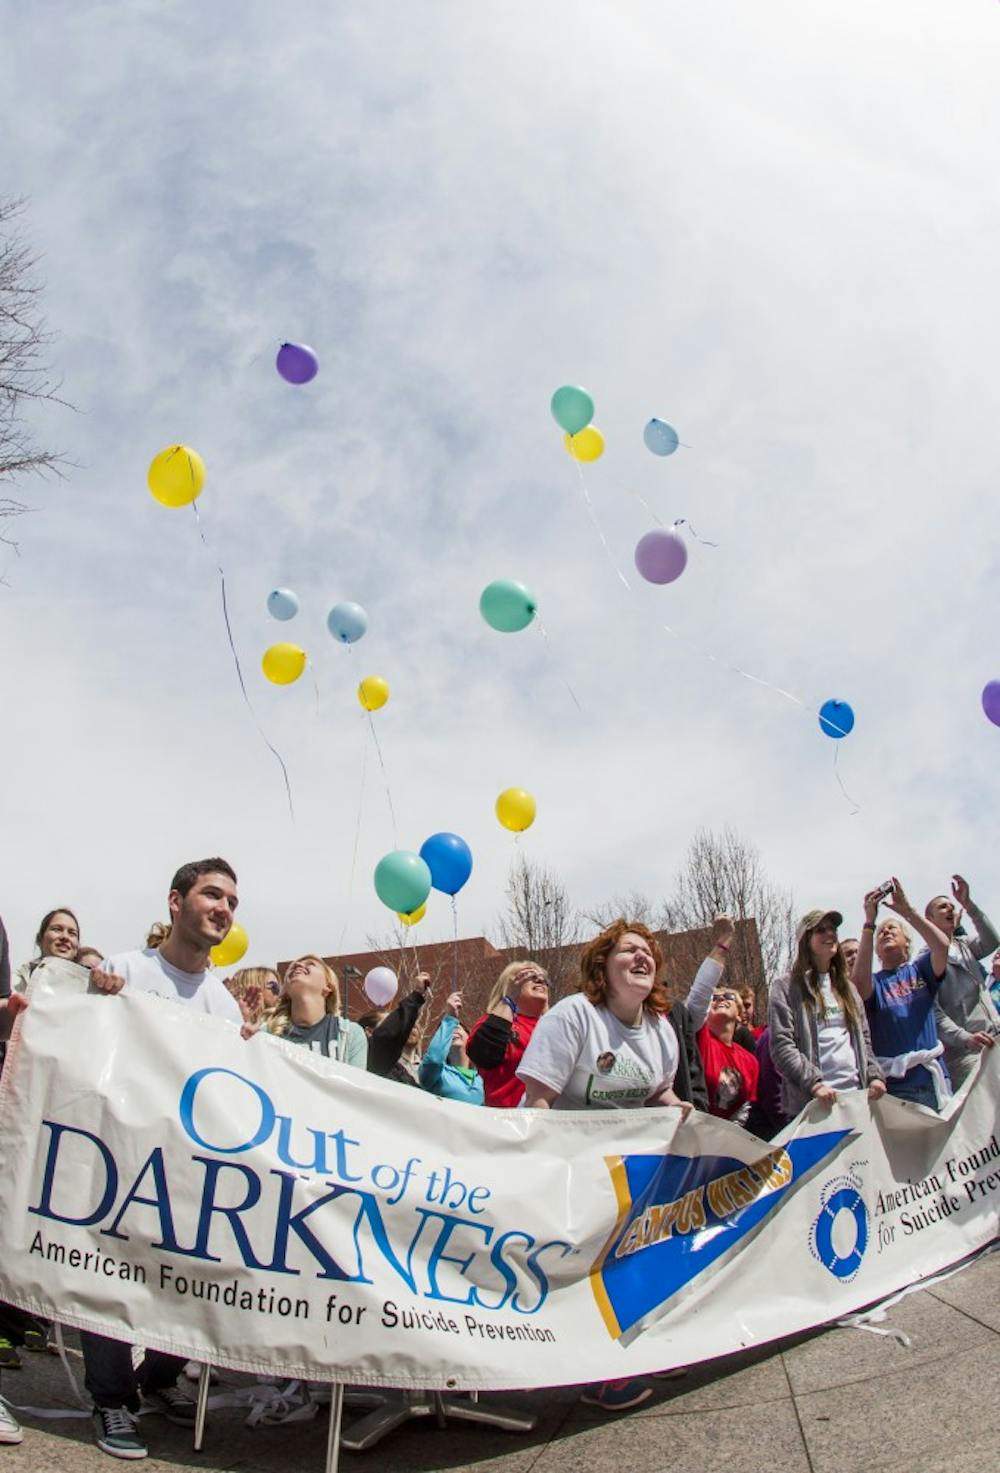 Participants in the Out of the Darkness Walk release balloons in memory of their loved ones at the conclusion of the event April 6. The event brought together people to bring attention to suicide and its prevention. DN PHOTO JONATHAN MIKSANEK